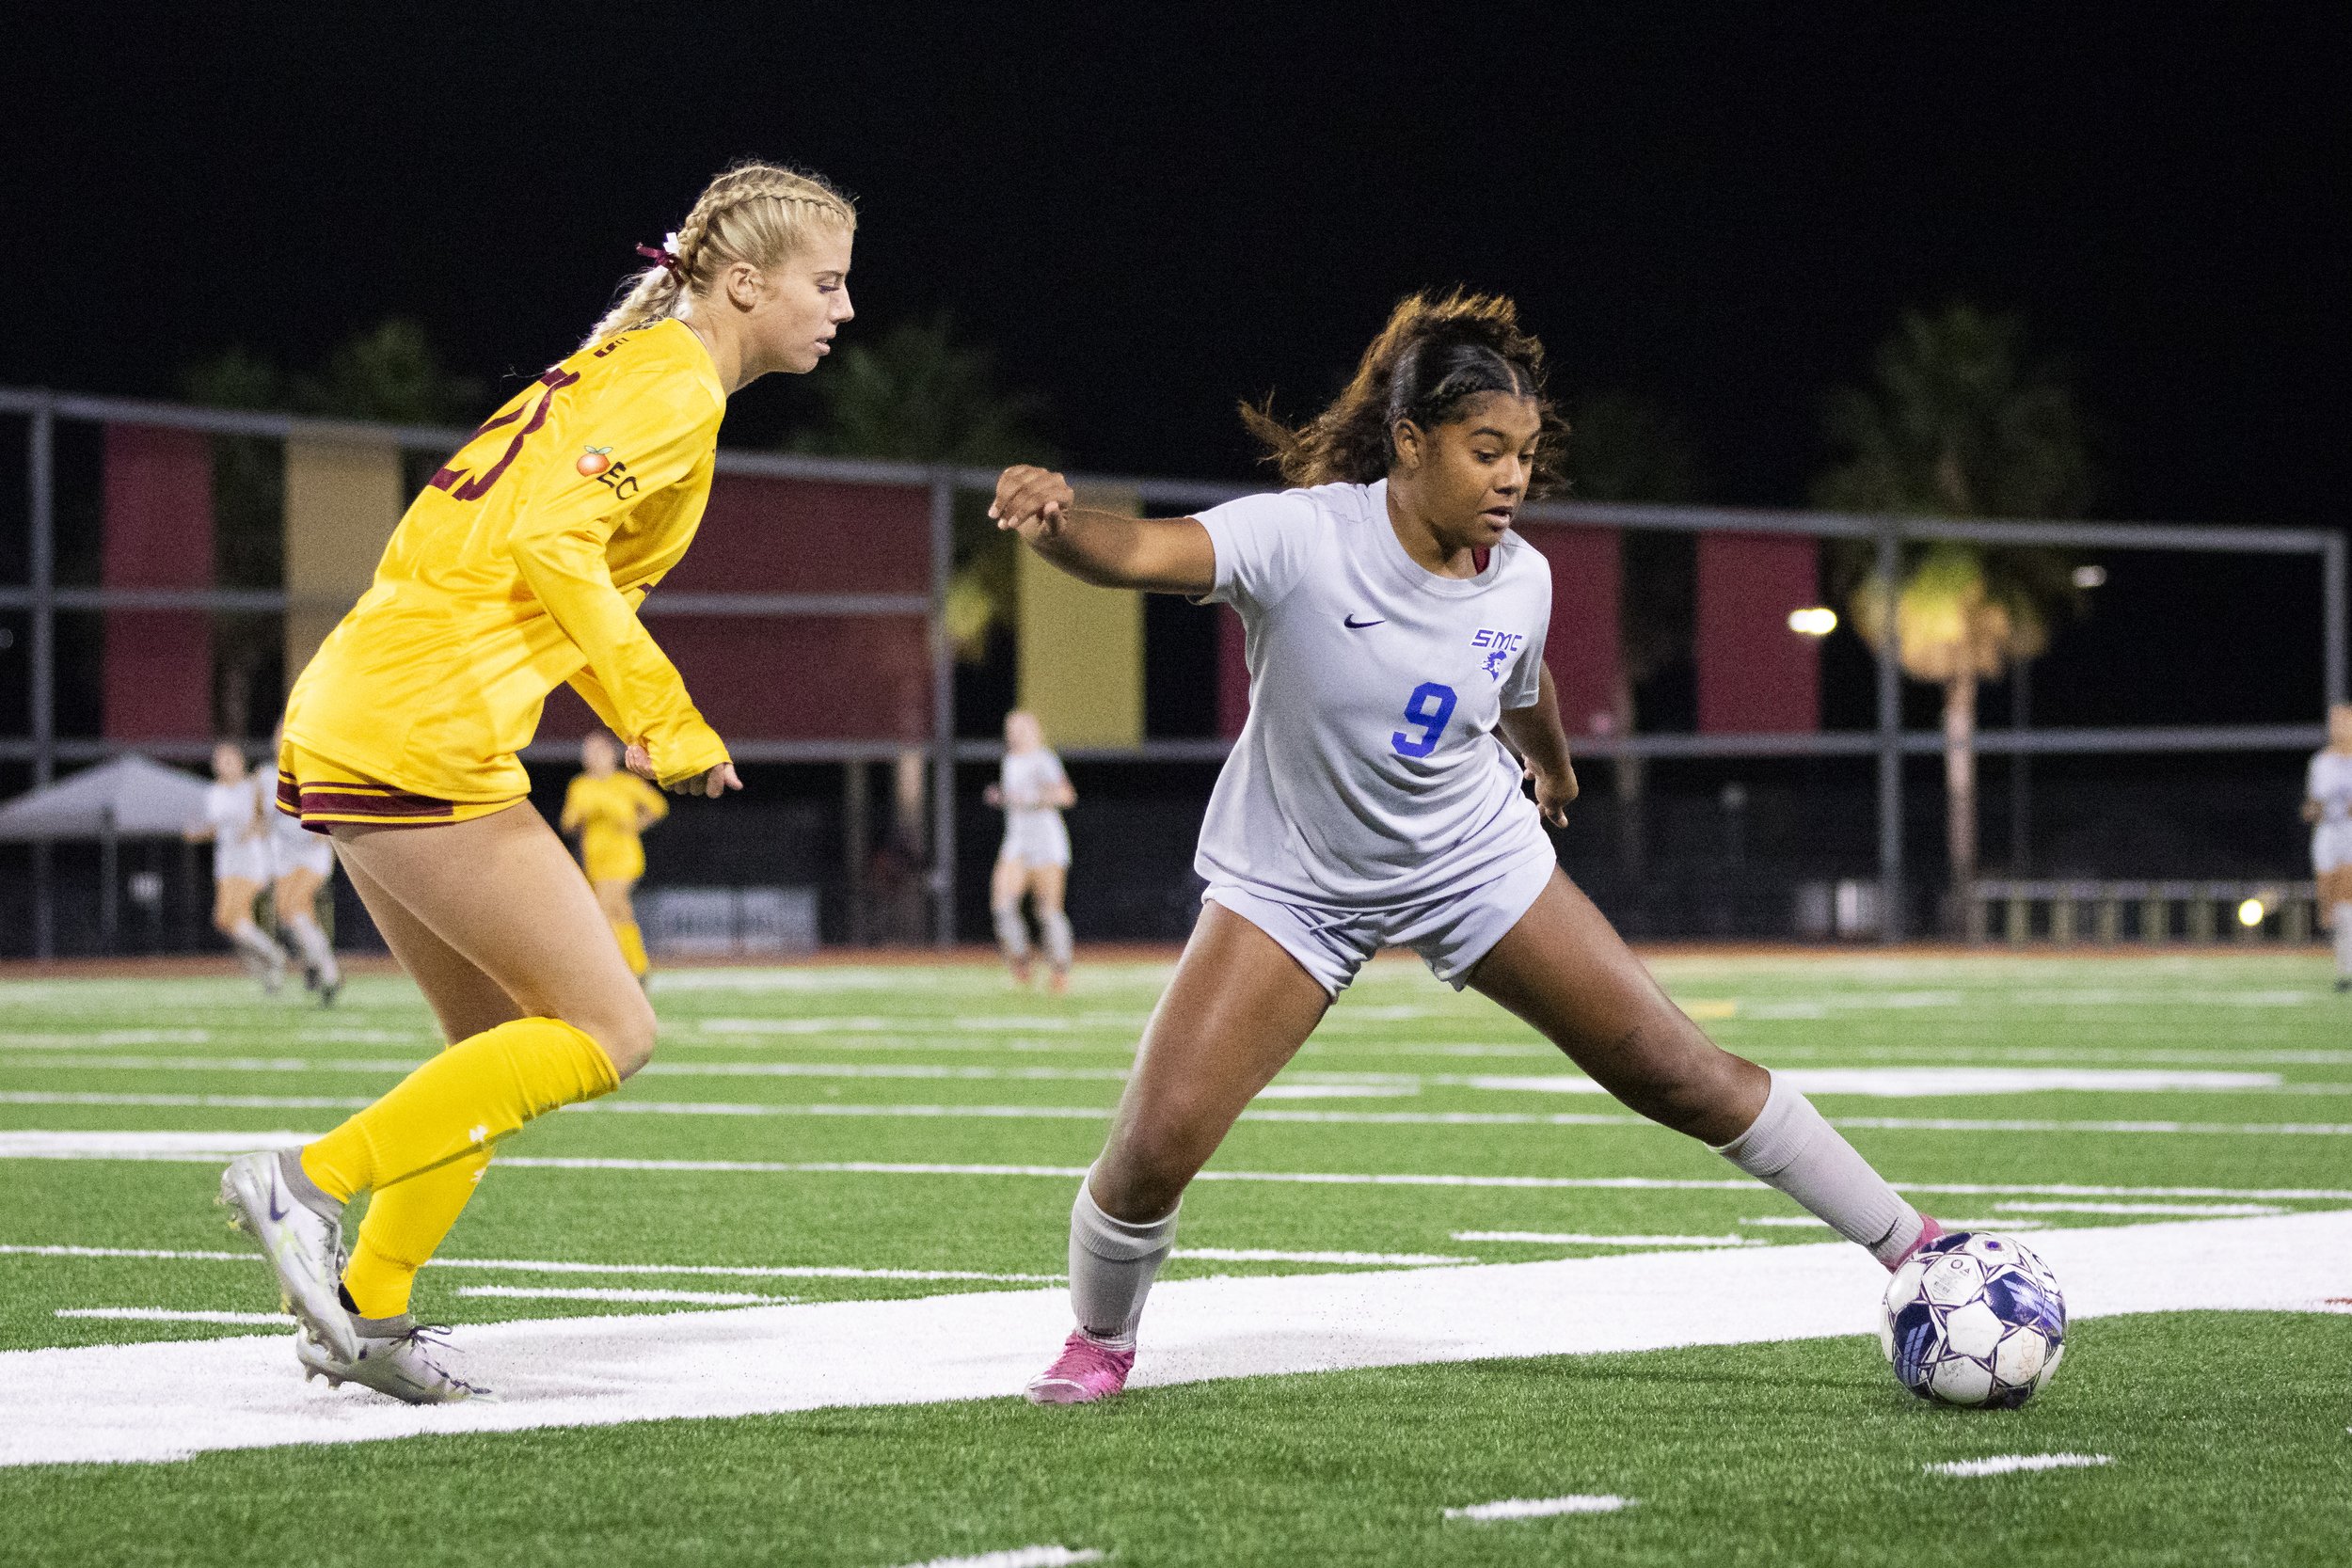  Santa Monica College Corsair forward Amarah Martinez (right) attacks while Saddleback College Bobcat’s defense Summer Hackett (left) attempts to take control of the ball in the second half of a soccer game at Saddleback College in Mission Viejo, Cal